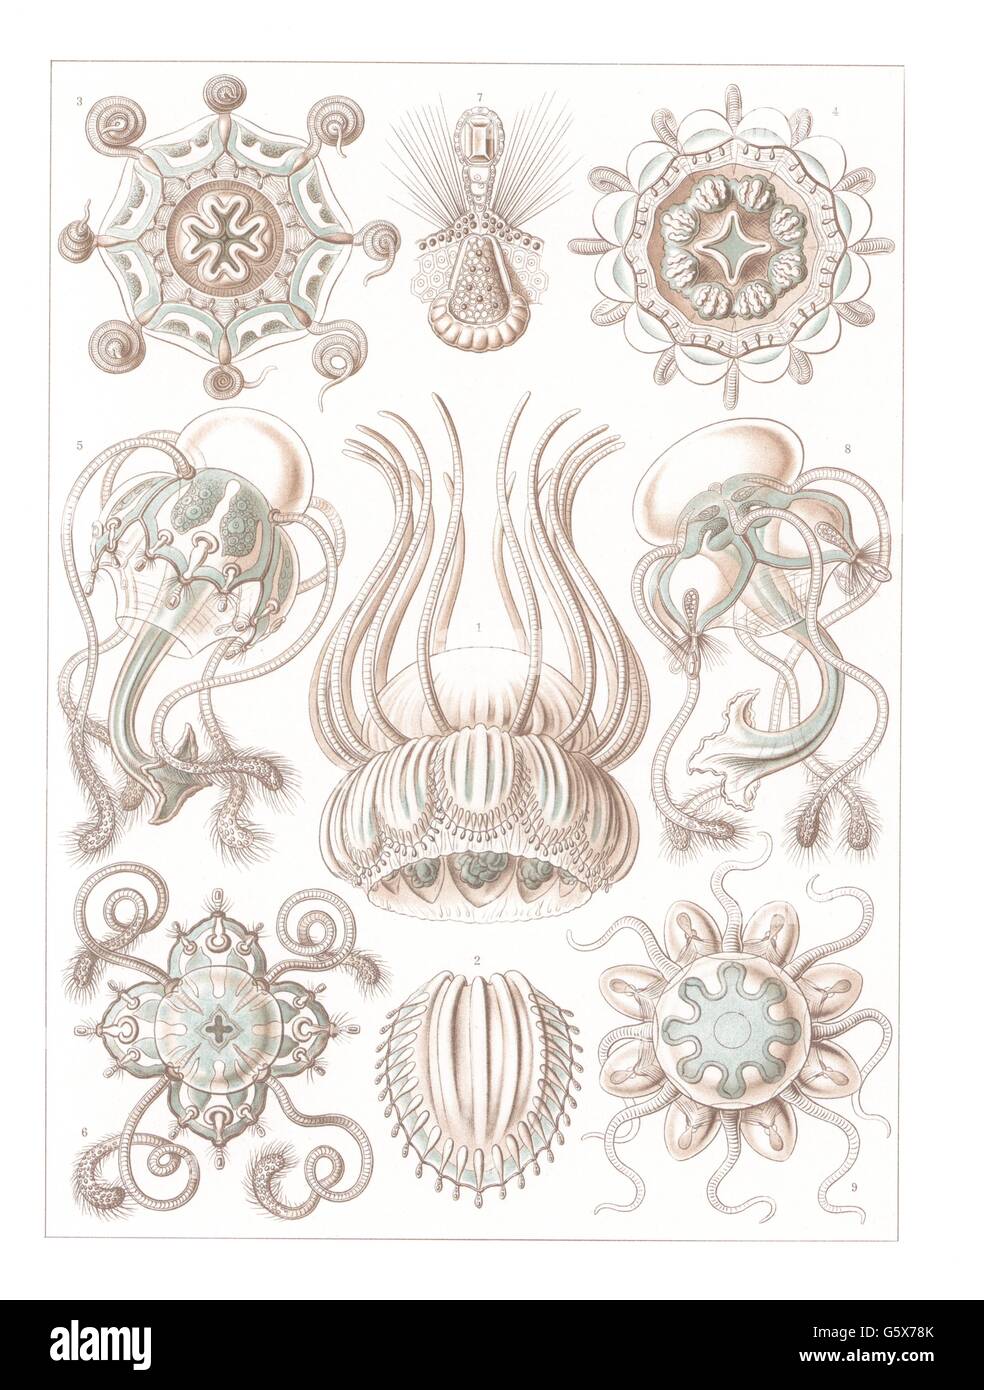 zoology / animals, cnidaria, narcomedusae, colour lithograph, out of: Ernst Haeckel, 'Kunstformen der Natur', Leipzig - Vienna, 1899 - 1904, Additional-Rights-Clearences-Not Available Stock Photo